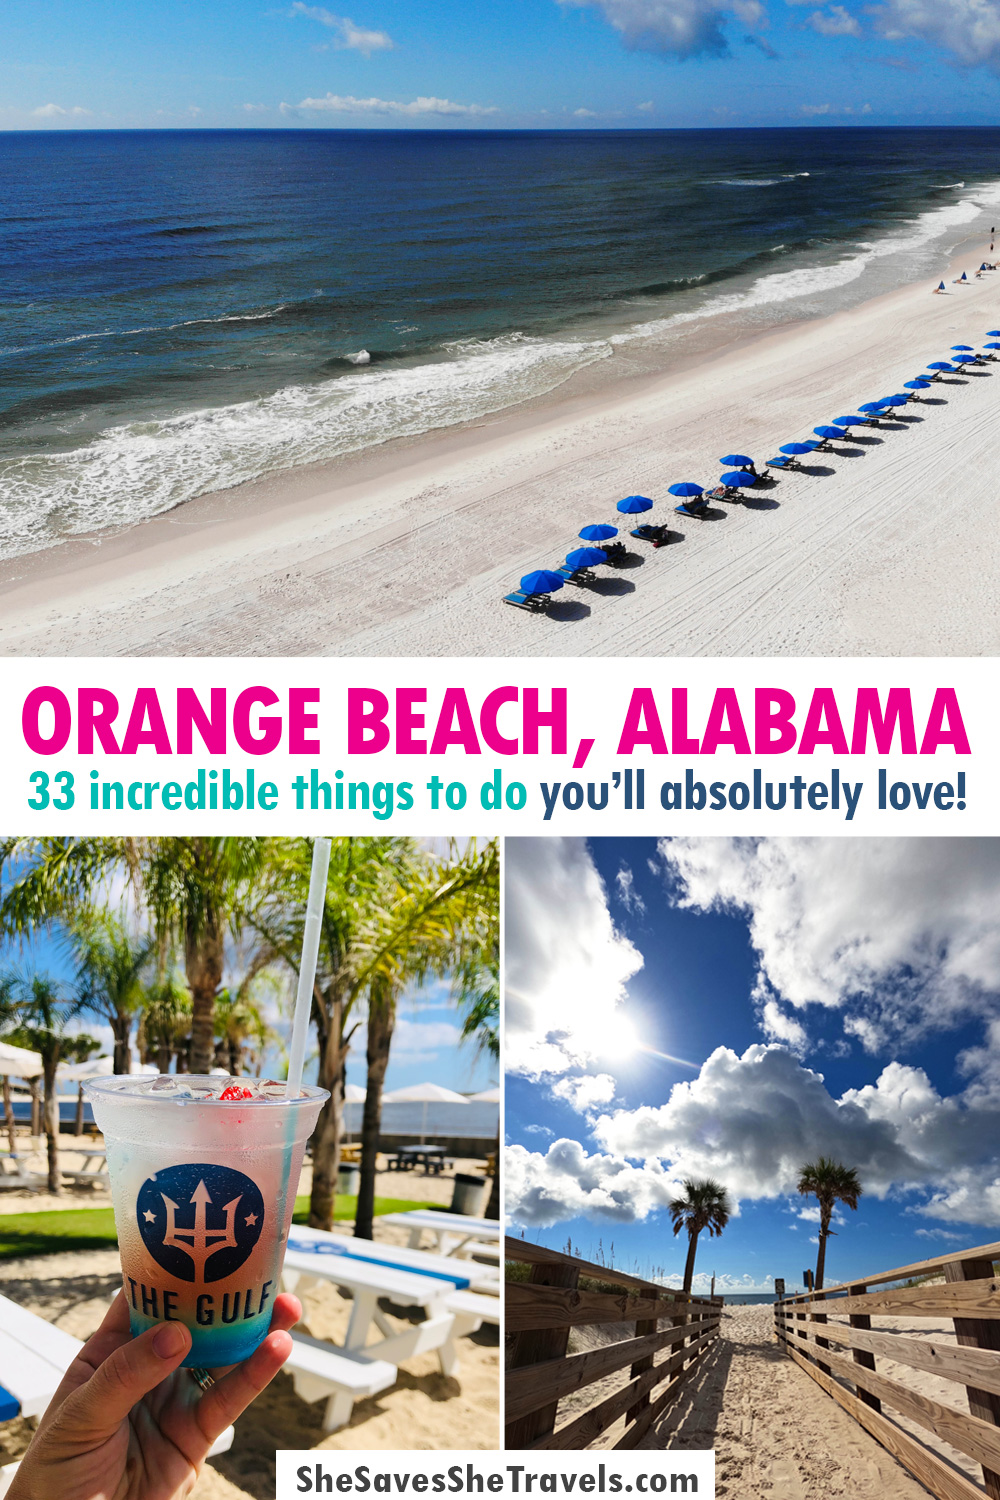 orange beach alabama 33 incredible things to do you'll absolutely love photos of beaches and drink